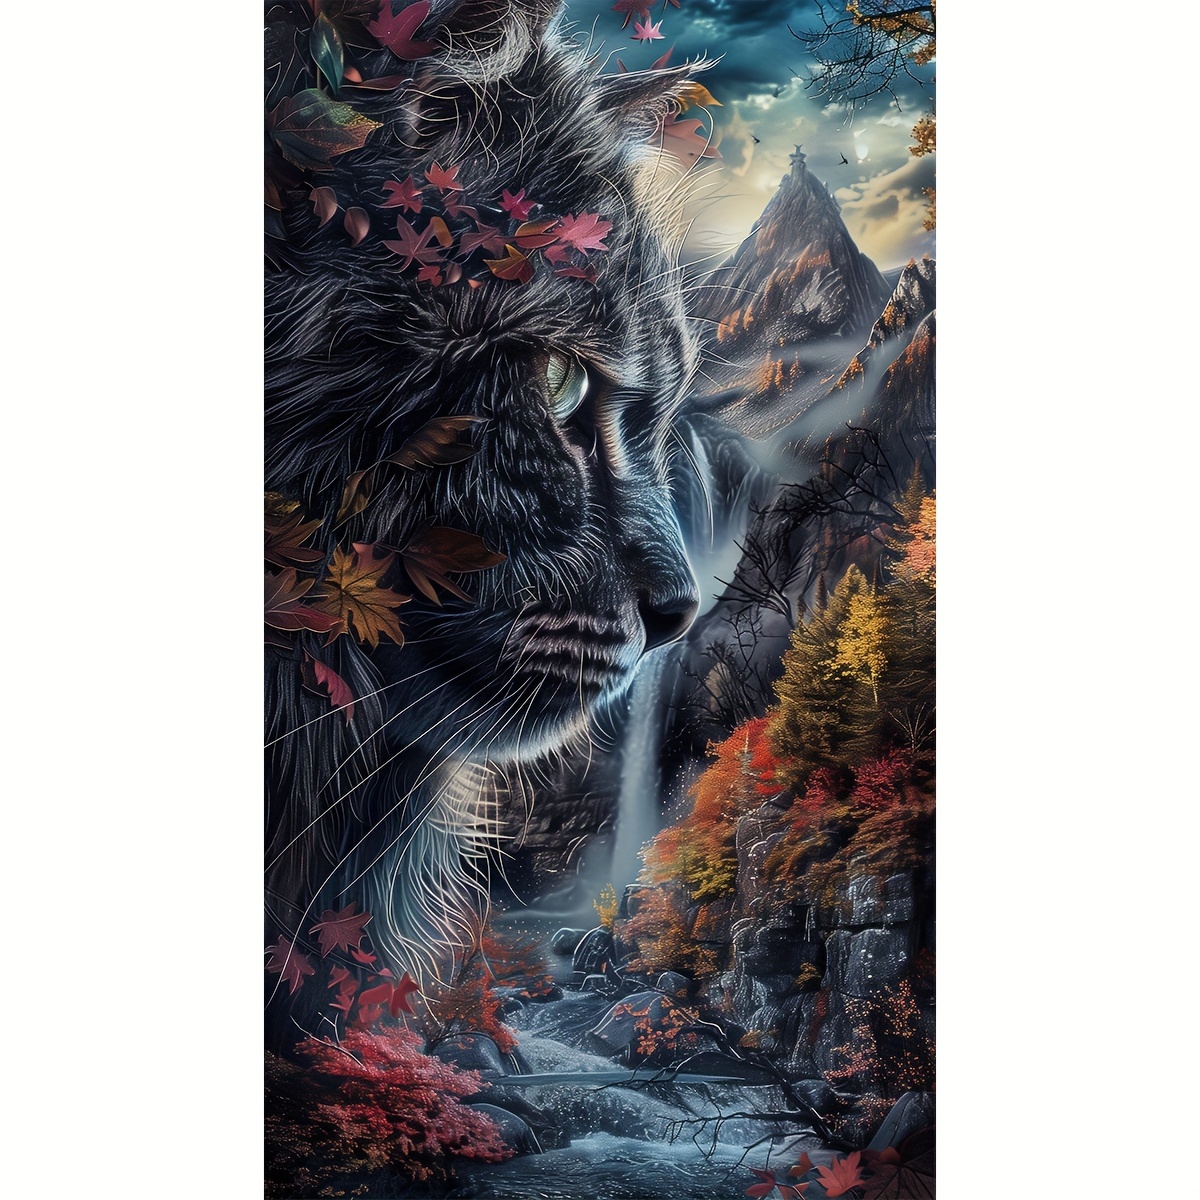 

40*70cm/15.7*27.6in Large Diamond Painting Kit: Fascinating Cats By The Waterfall - Perfect For Diy Art Enthusiasts